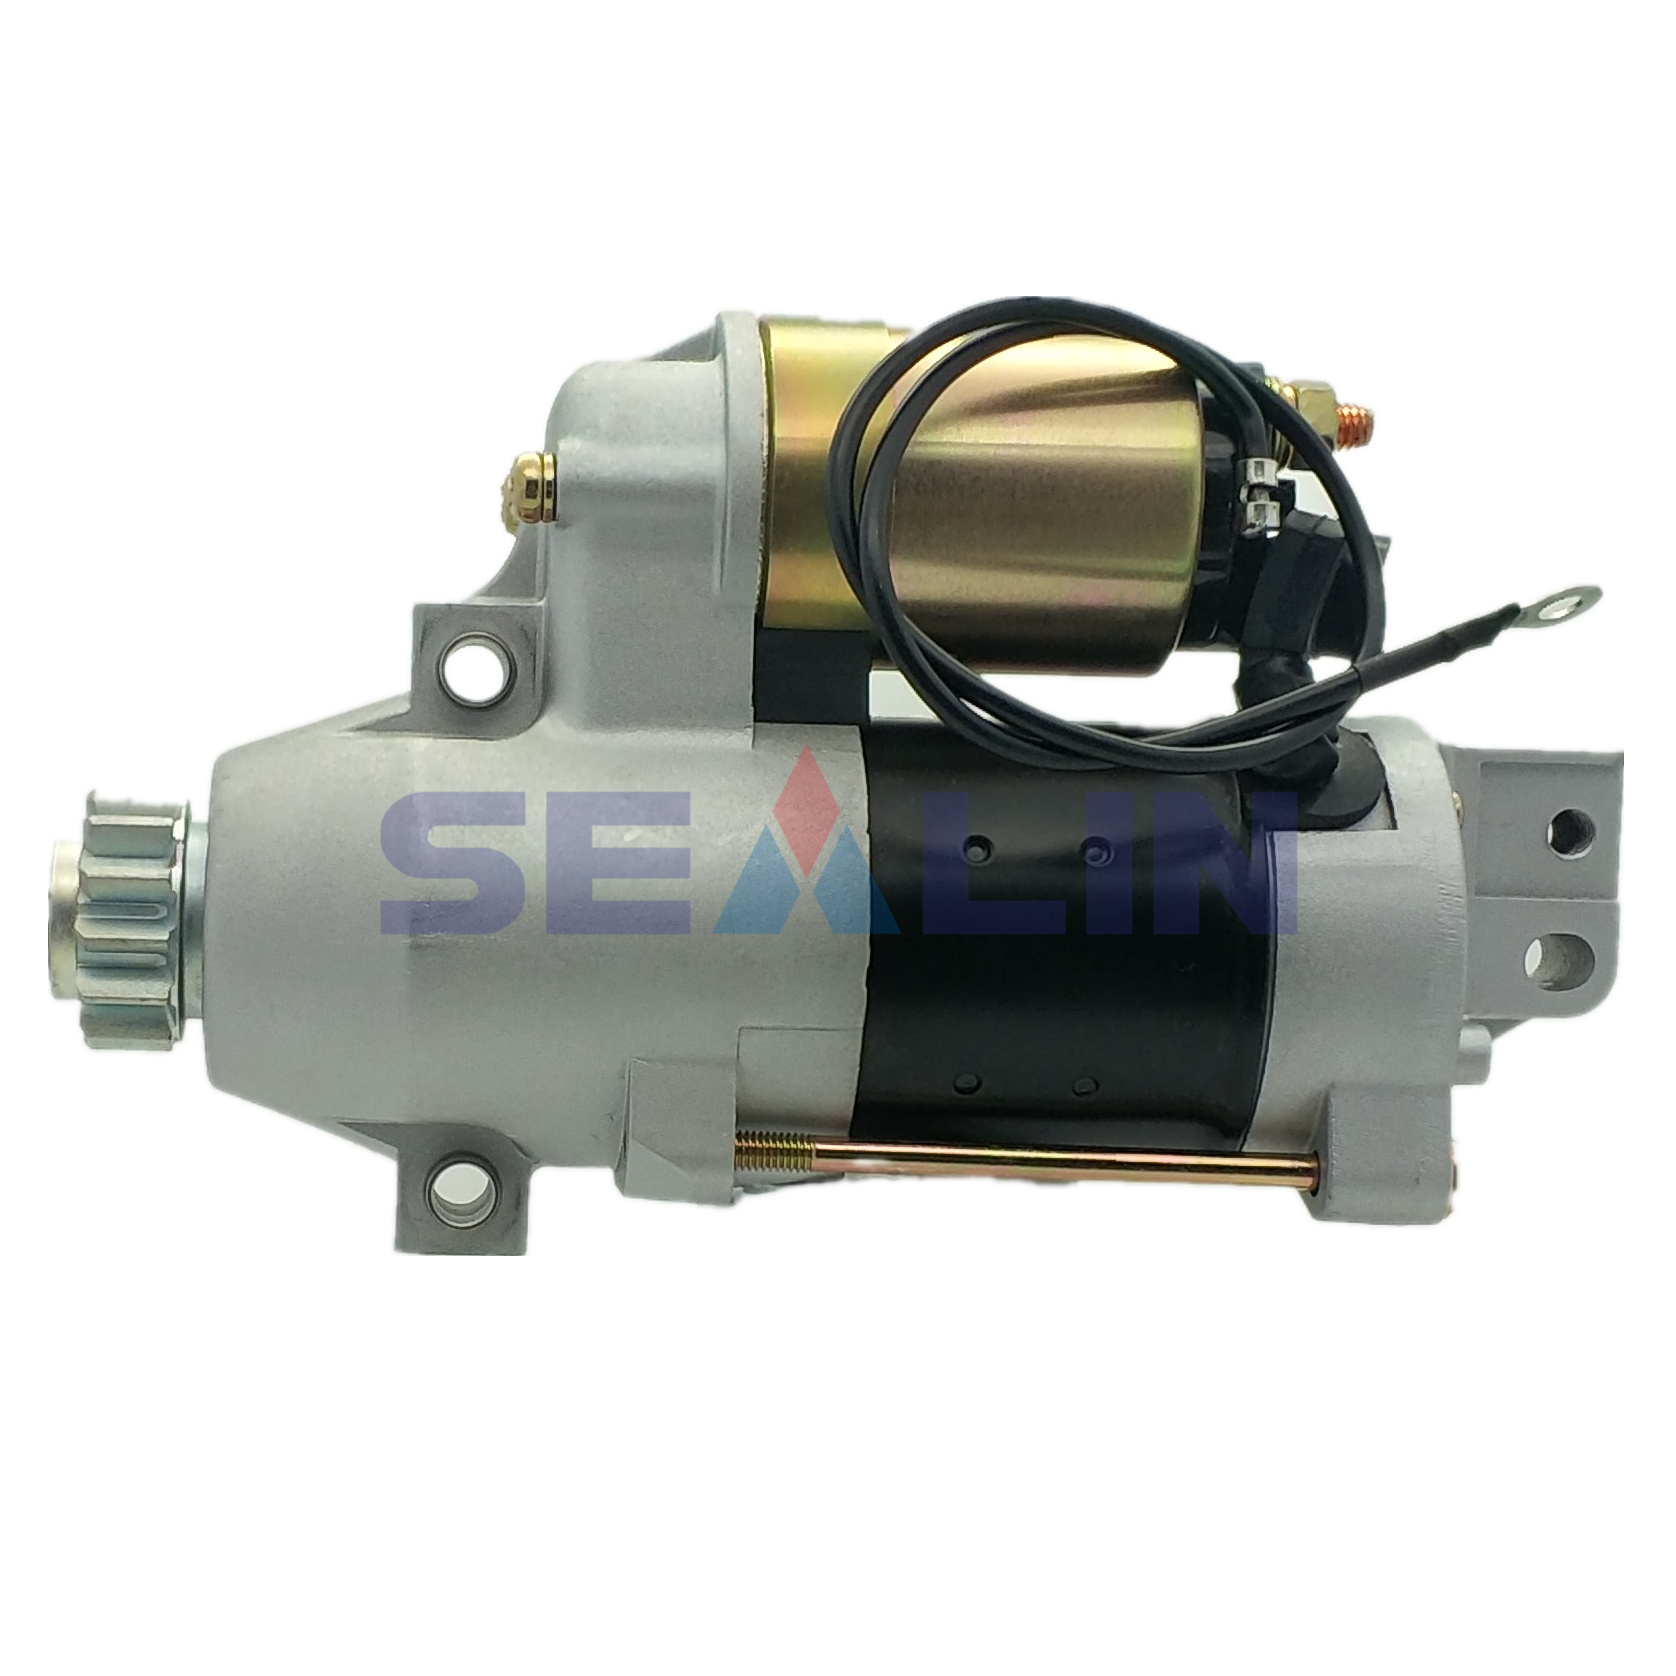 Yamaha Outboard Starter S114-867 S114-867A S114-867B S114-867BN Yamaha 63P-81800-00 63P-81800-00-00 6BR-81800-00-00 6BR-81800-01 6BR-81800-01-00 Lester  18442